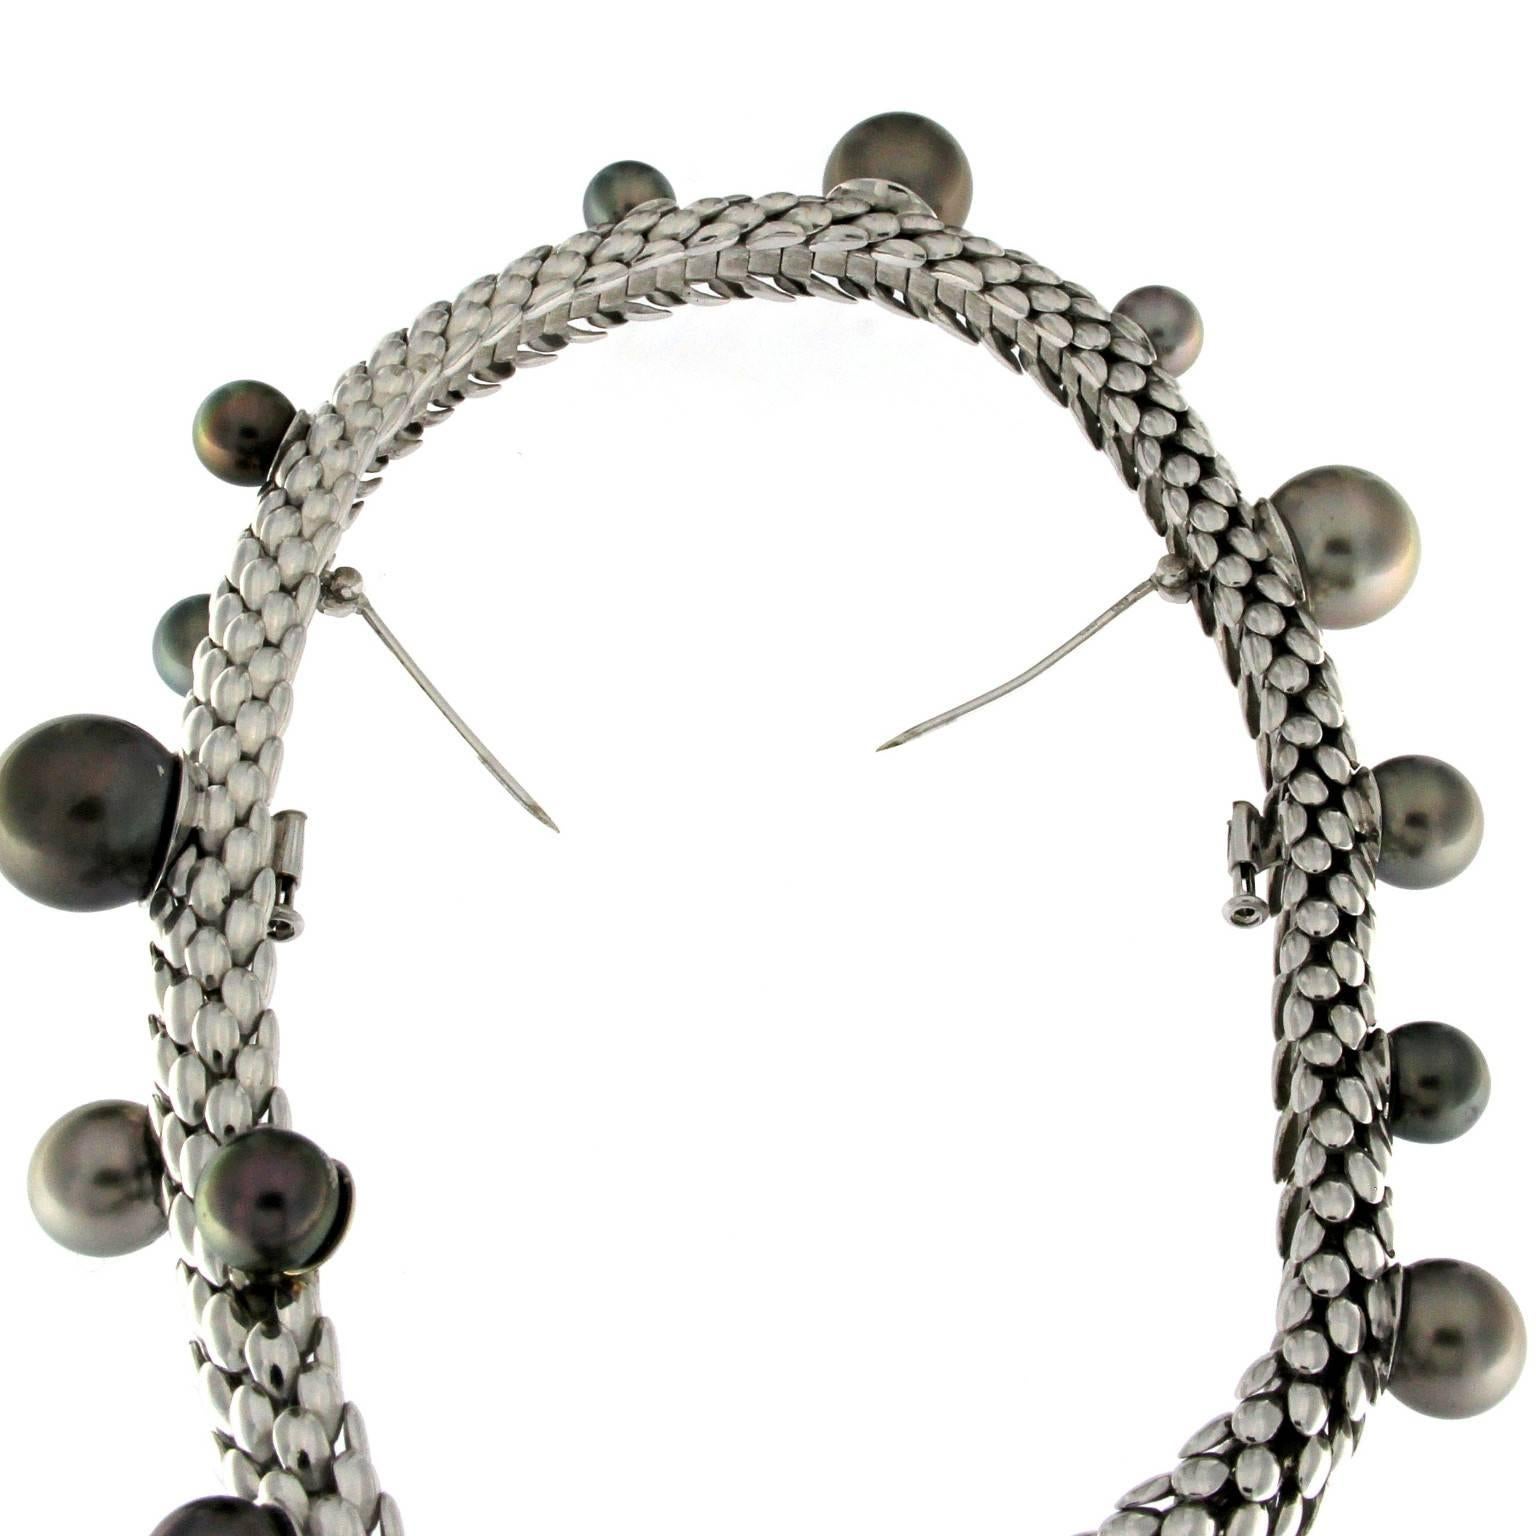 An extraordinary piece this that won the second place of the hawards of the 2002 of the South Sea Tahitian pearls Contest.
A sinuous and anatomic necklace.
The Tahitian pearls are of an extraordinary luminosity and from the intense color as only the